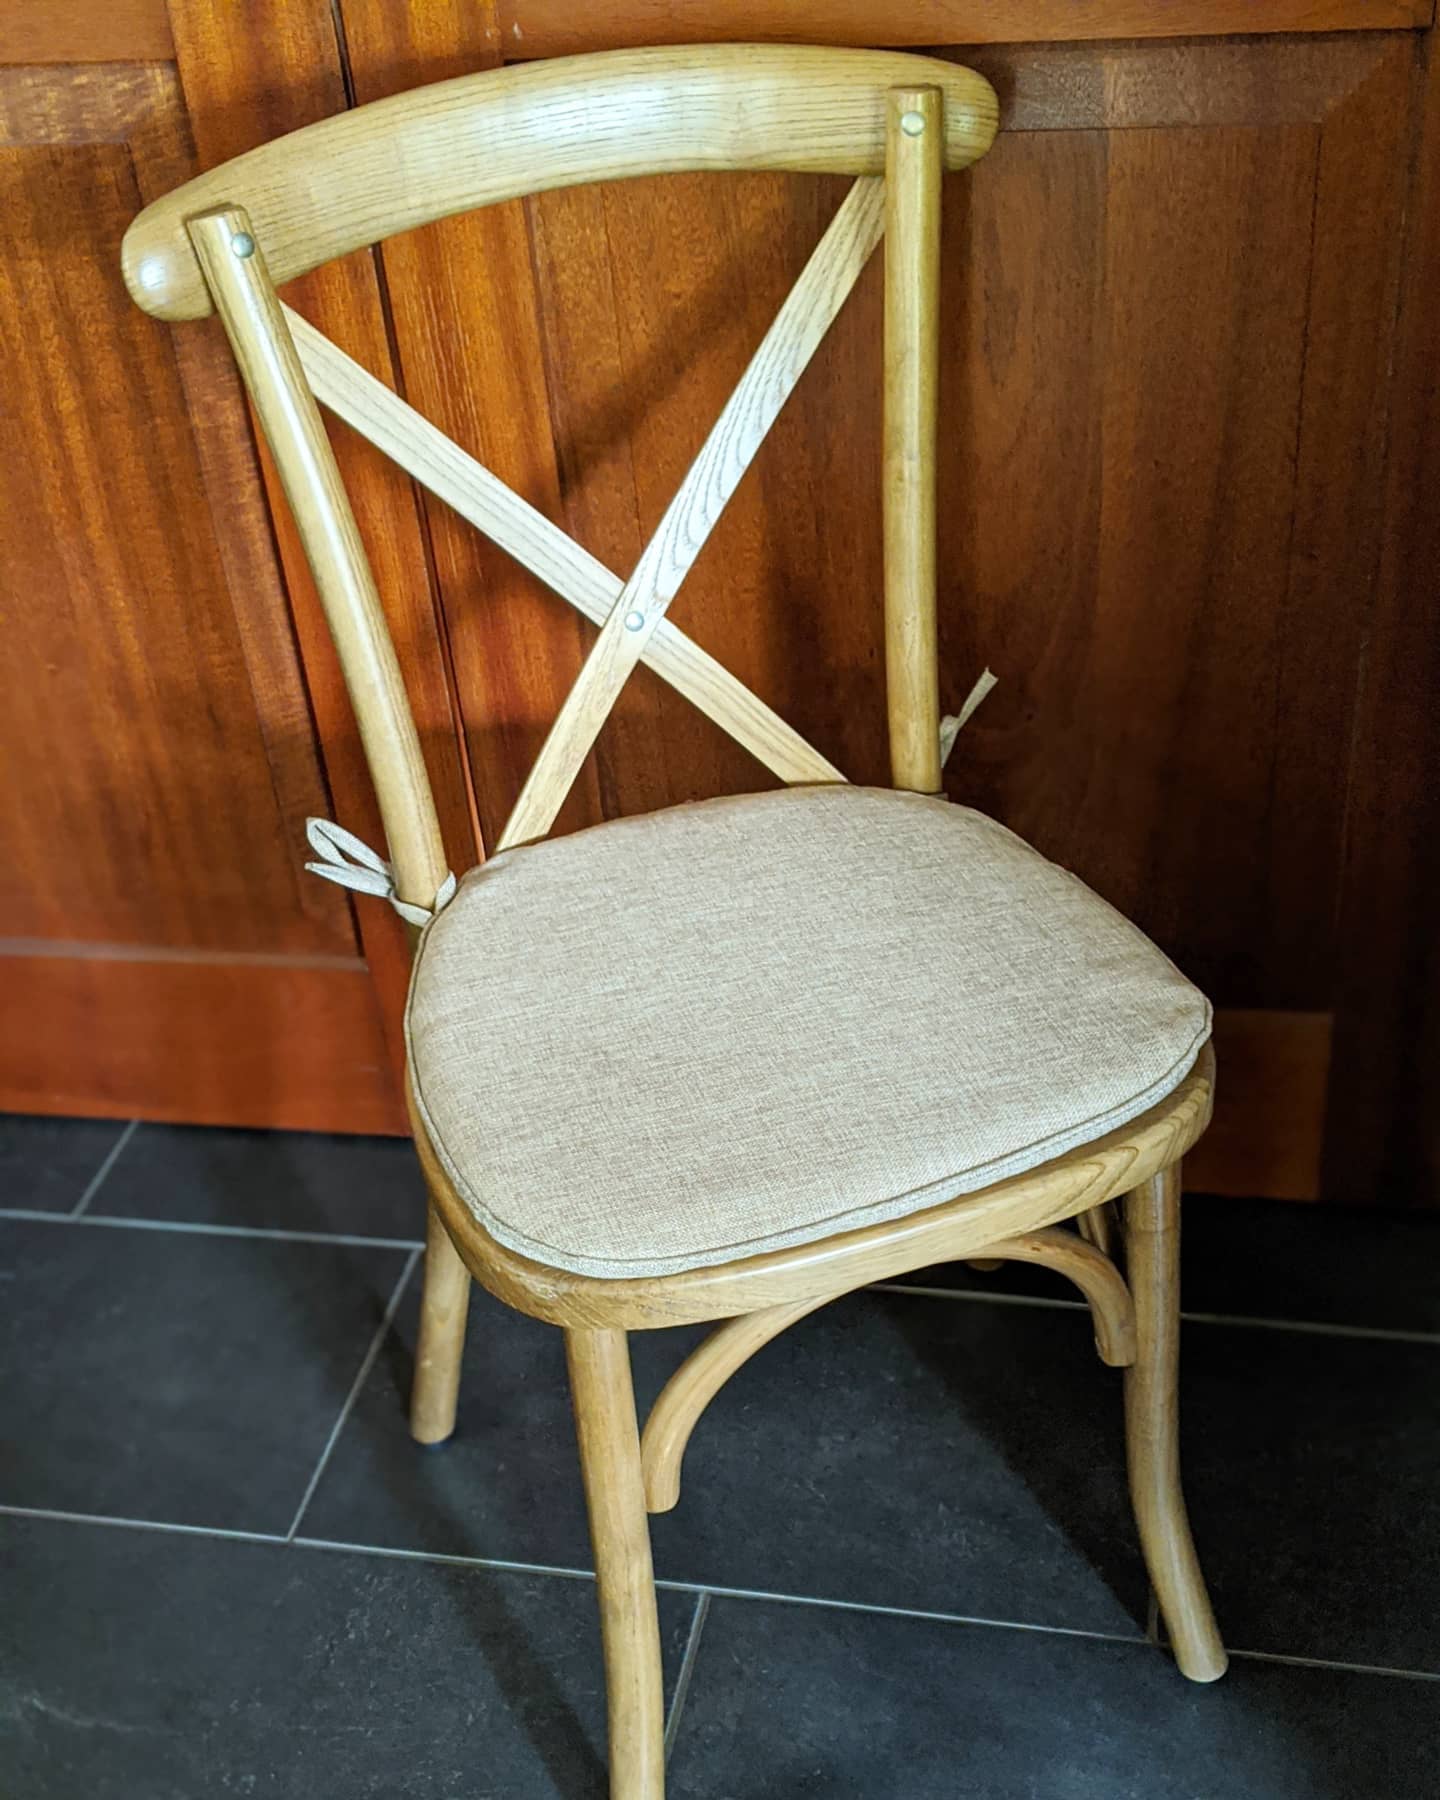 Cross back chair with seat cushion